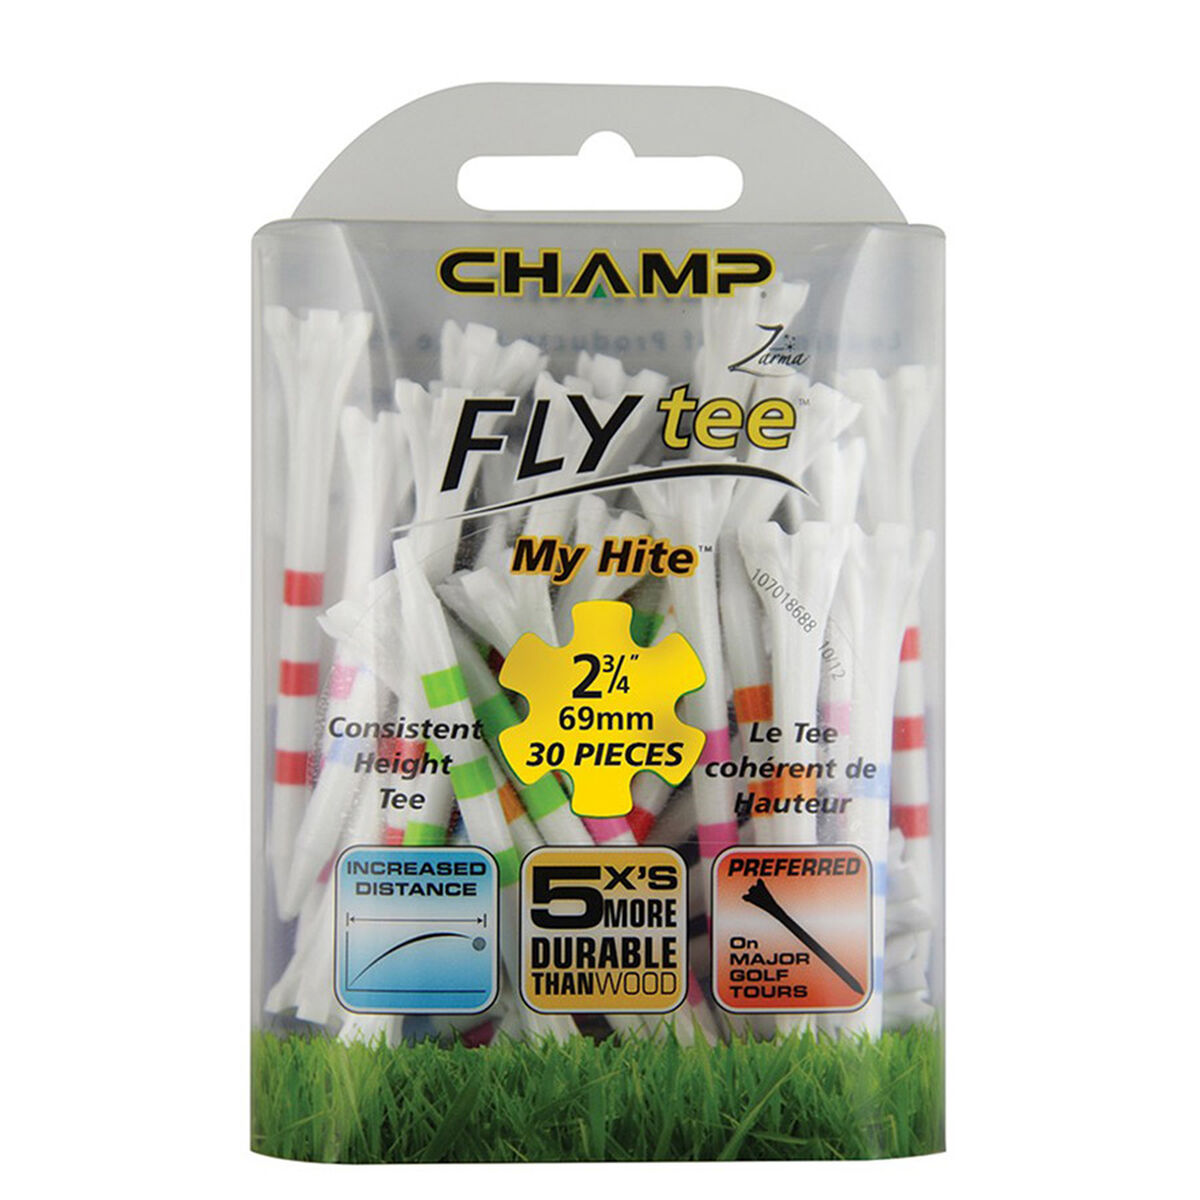 Champ MyHite Fly 69mm Golf Tees - 30 Pack, Mens, Tees, White, 69mm | American Golf